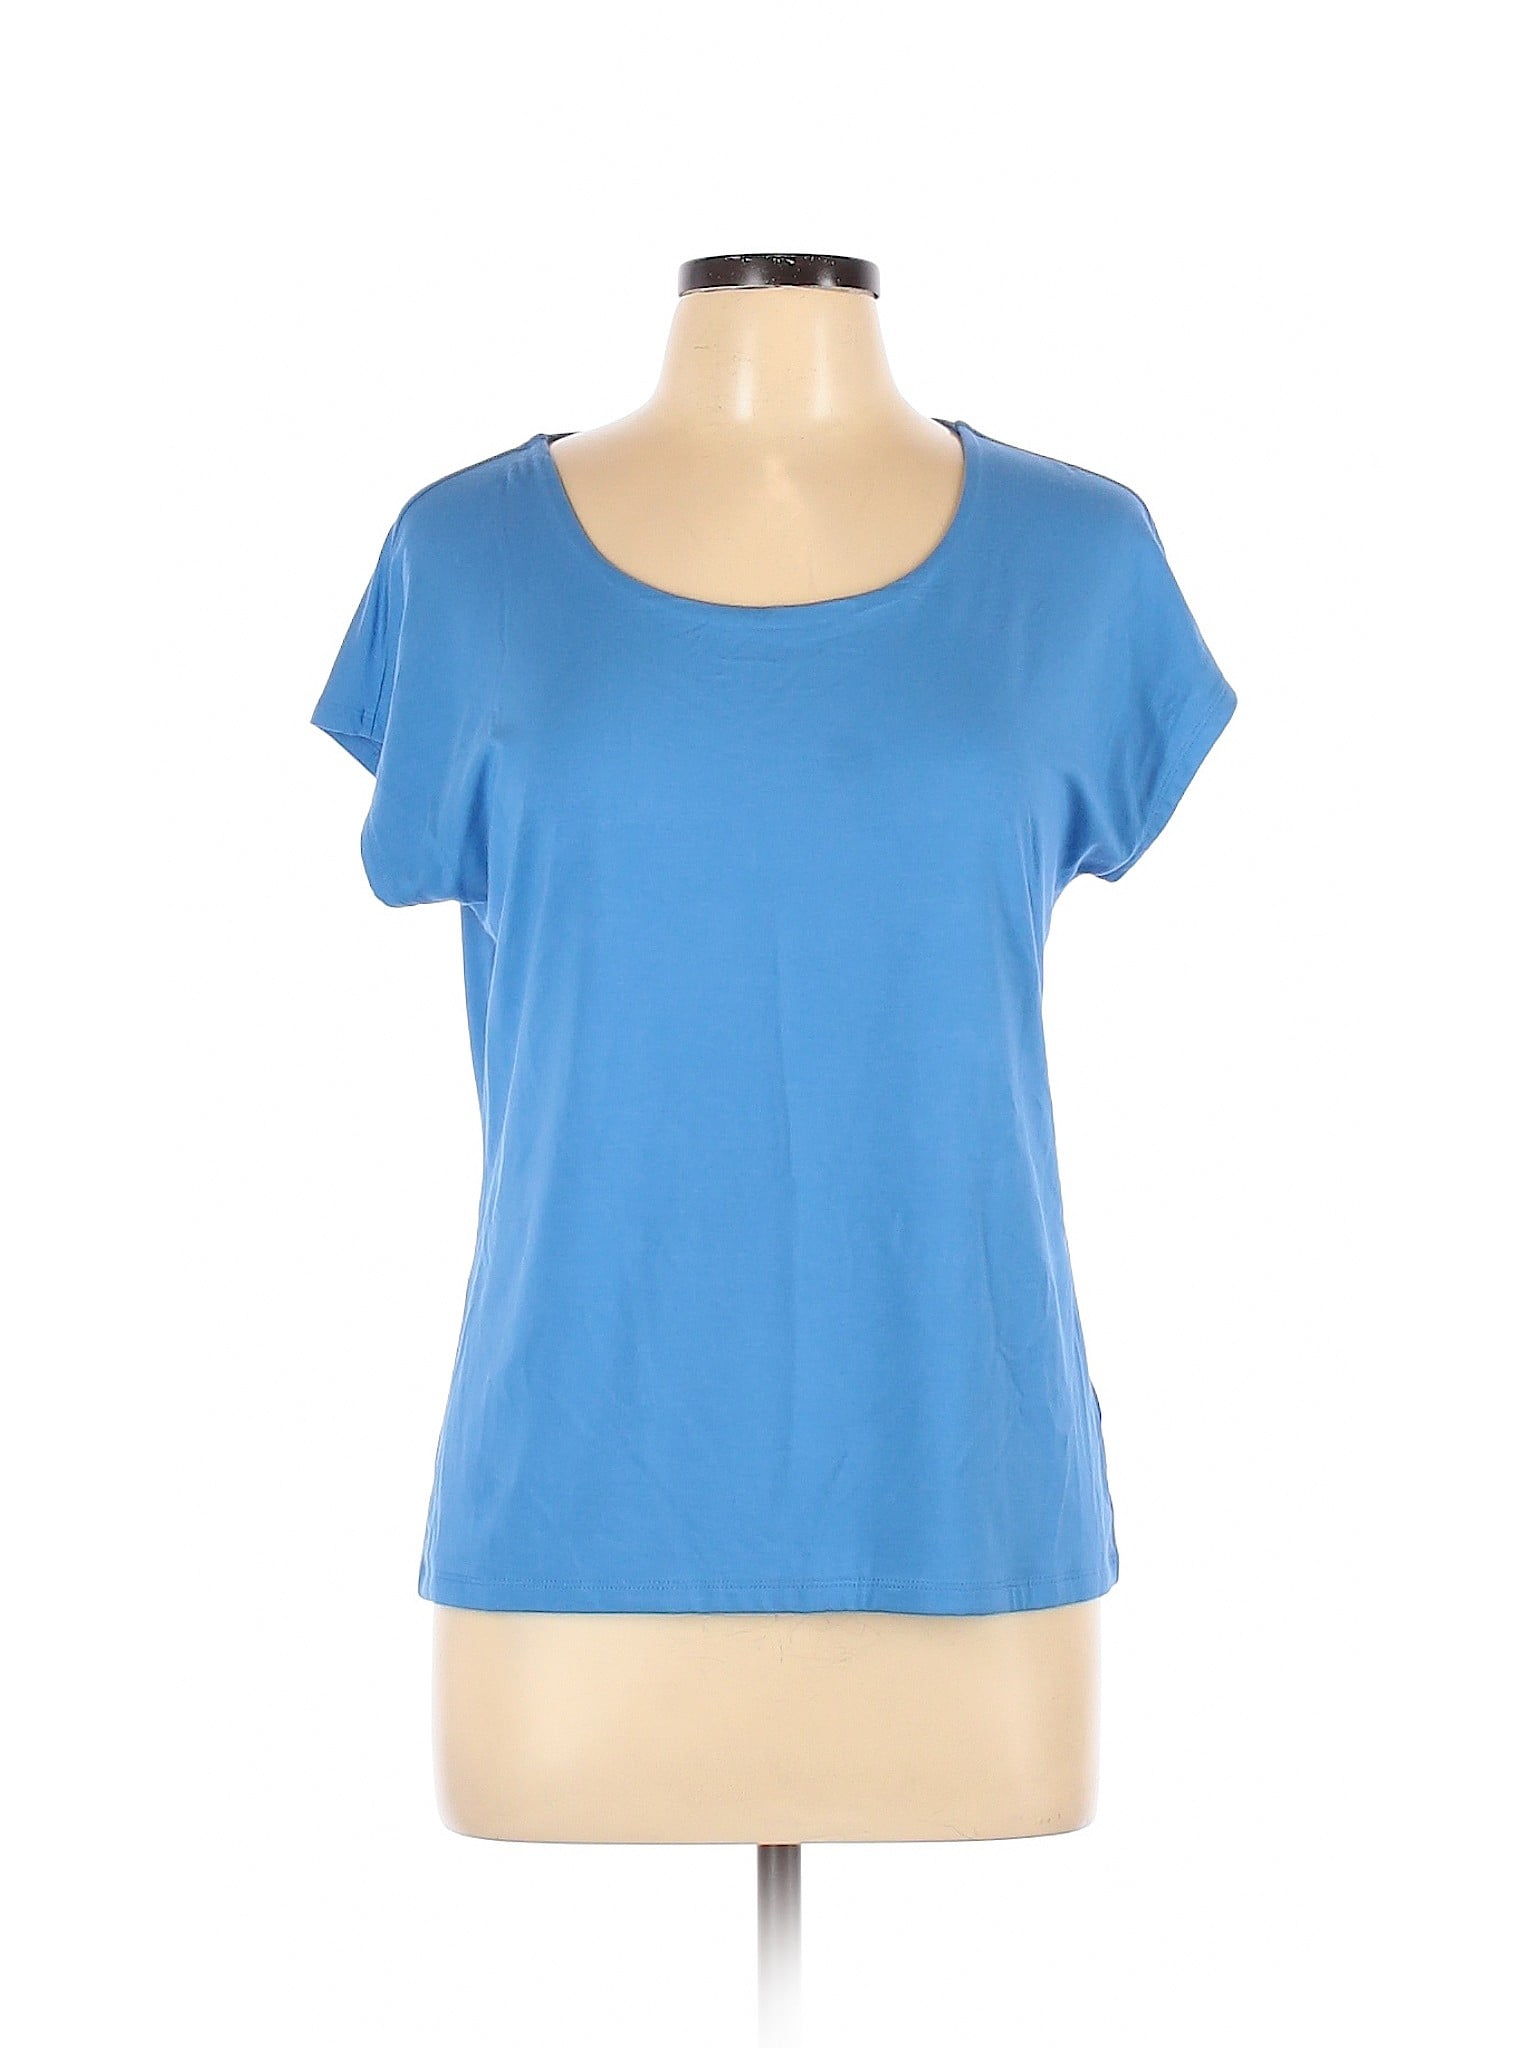 Talbots - Pre-Owned Talbots Women's Size L Petite Short Sleeve Top ...